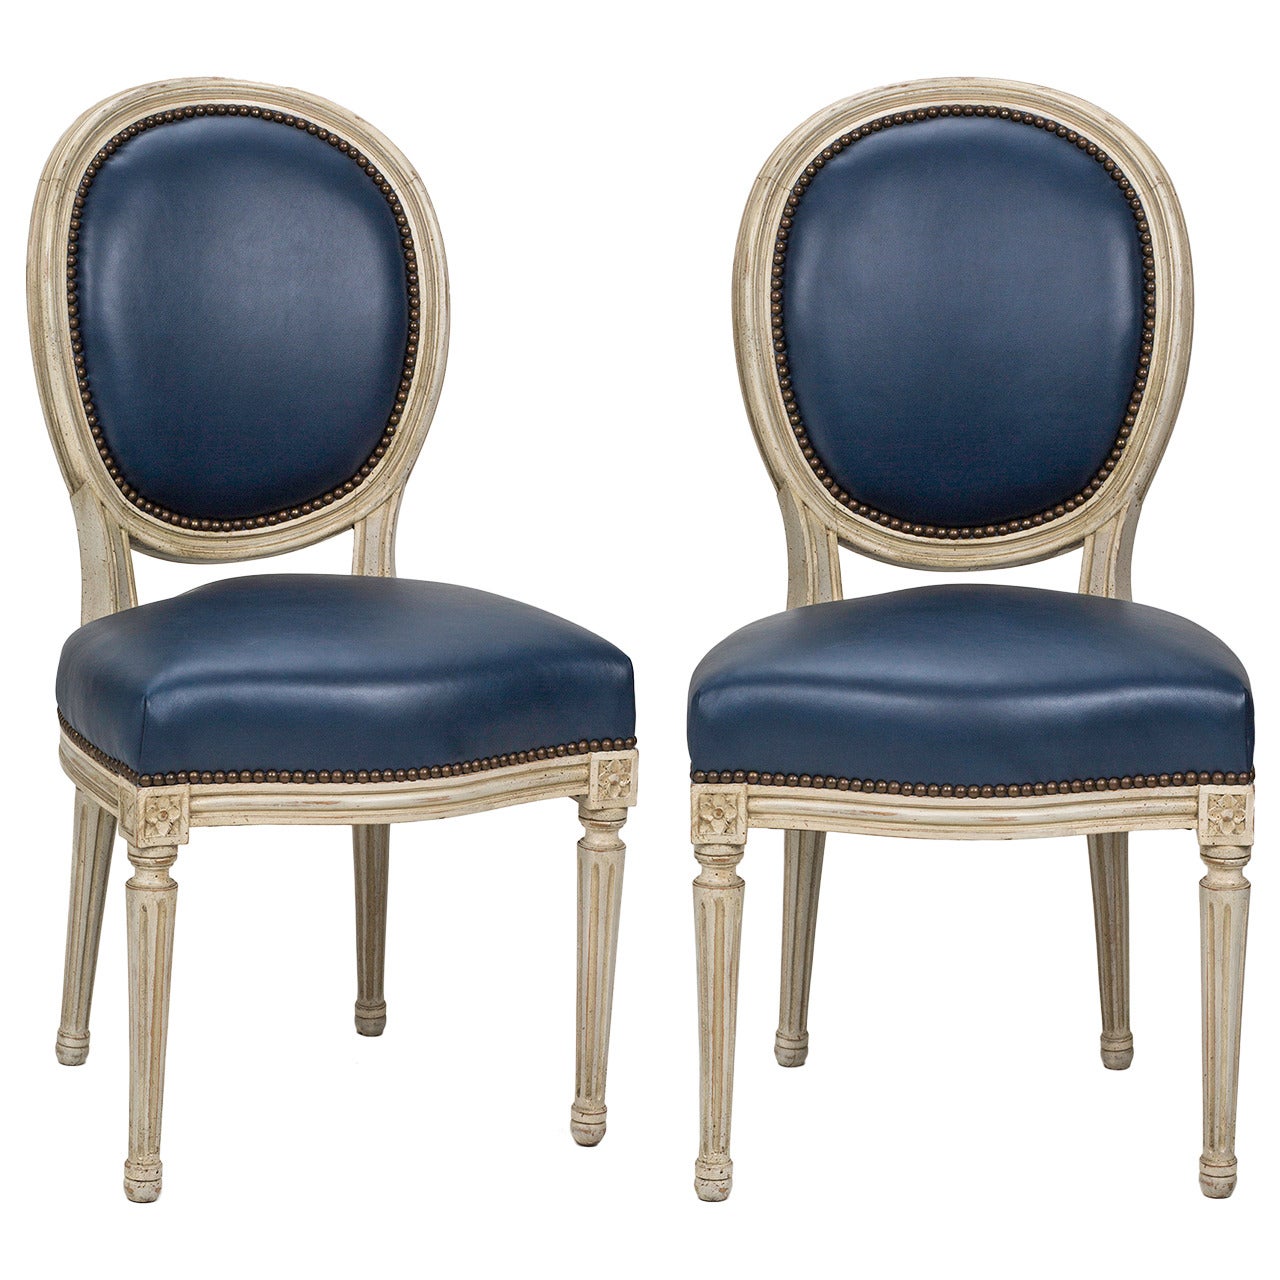 Pair of French Louis XVI Style Leather Chairs, circa 1880s